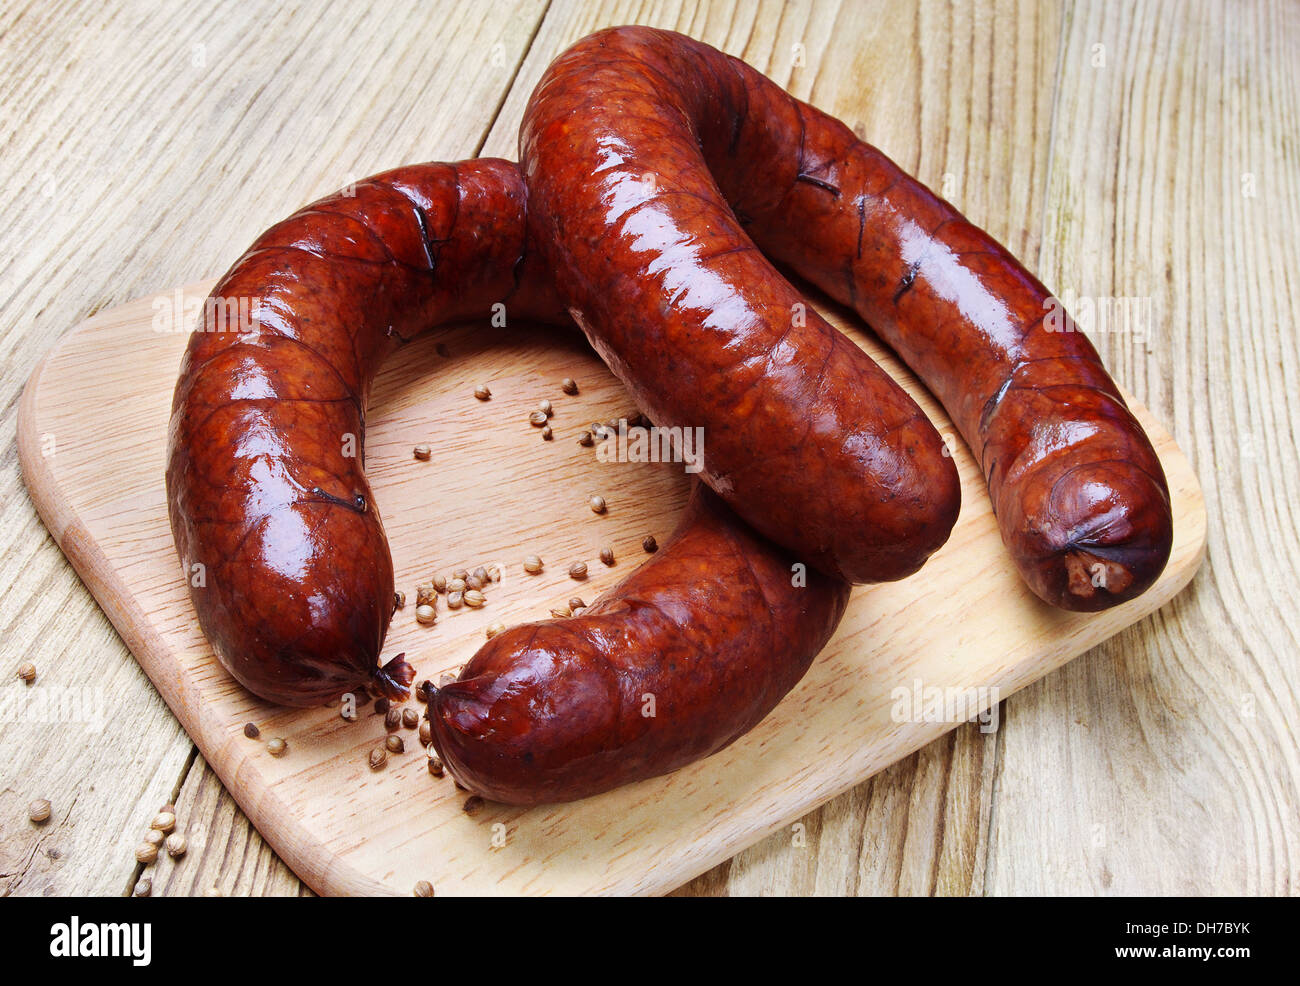 Homemade smoked sausage on a cutting board Stock Photo